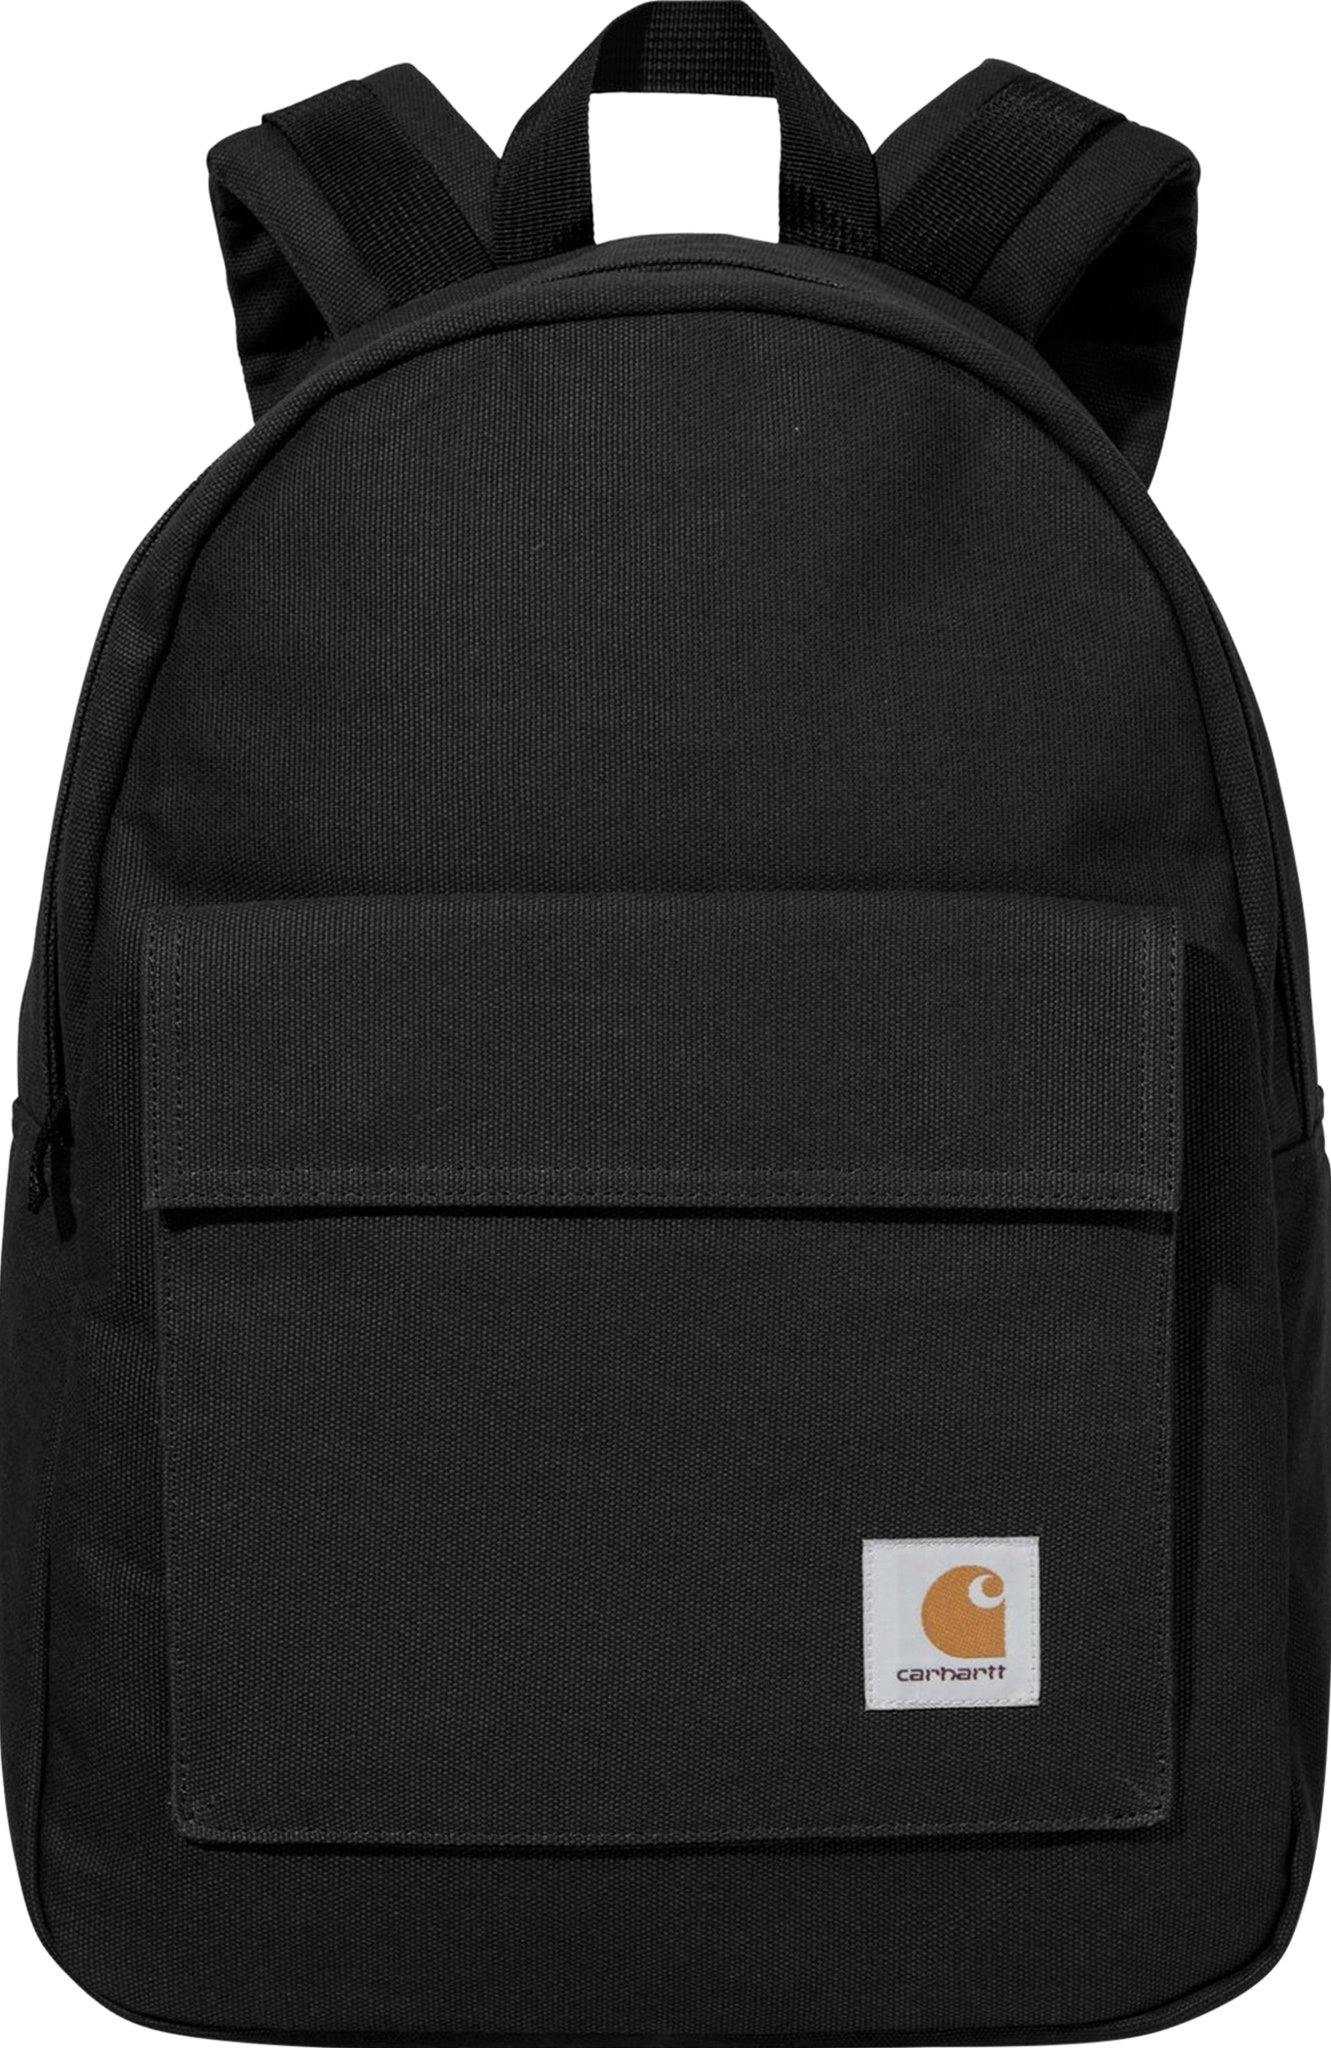 Product image for Dawn Backpack 15L